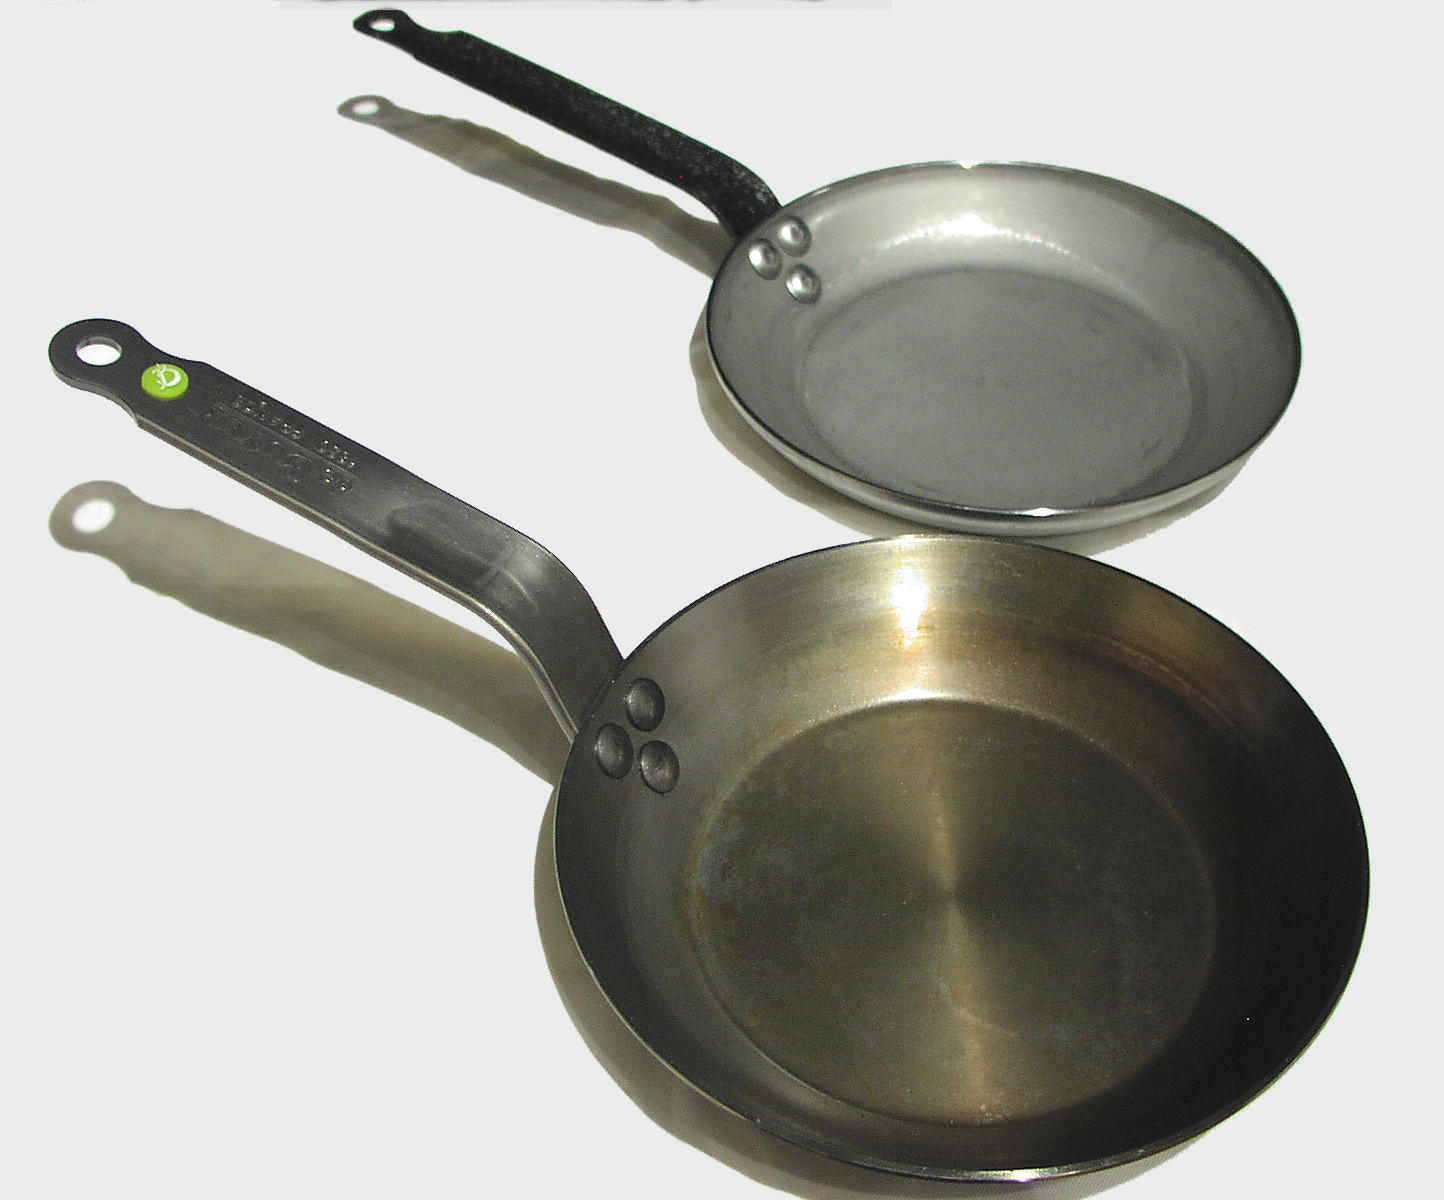 Real Living 12.5 Non-Stick Carbon Steel Wok